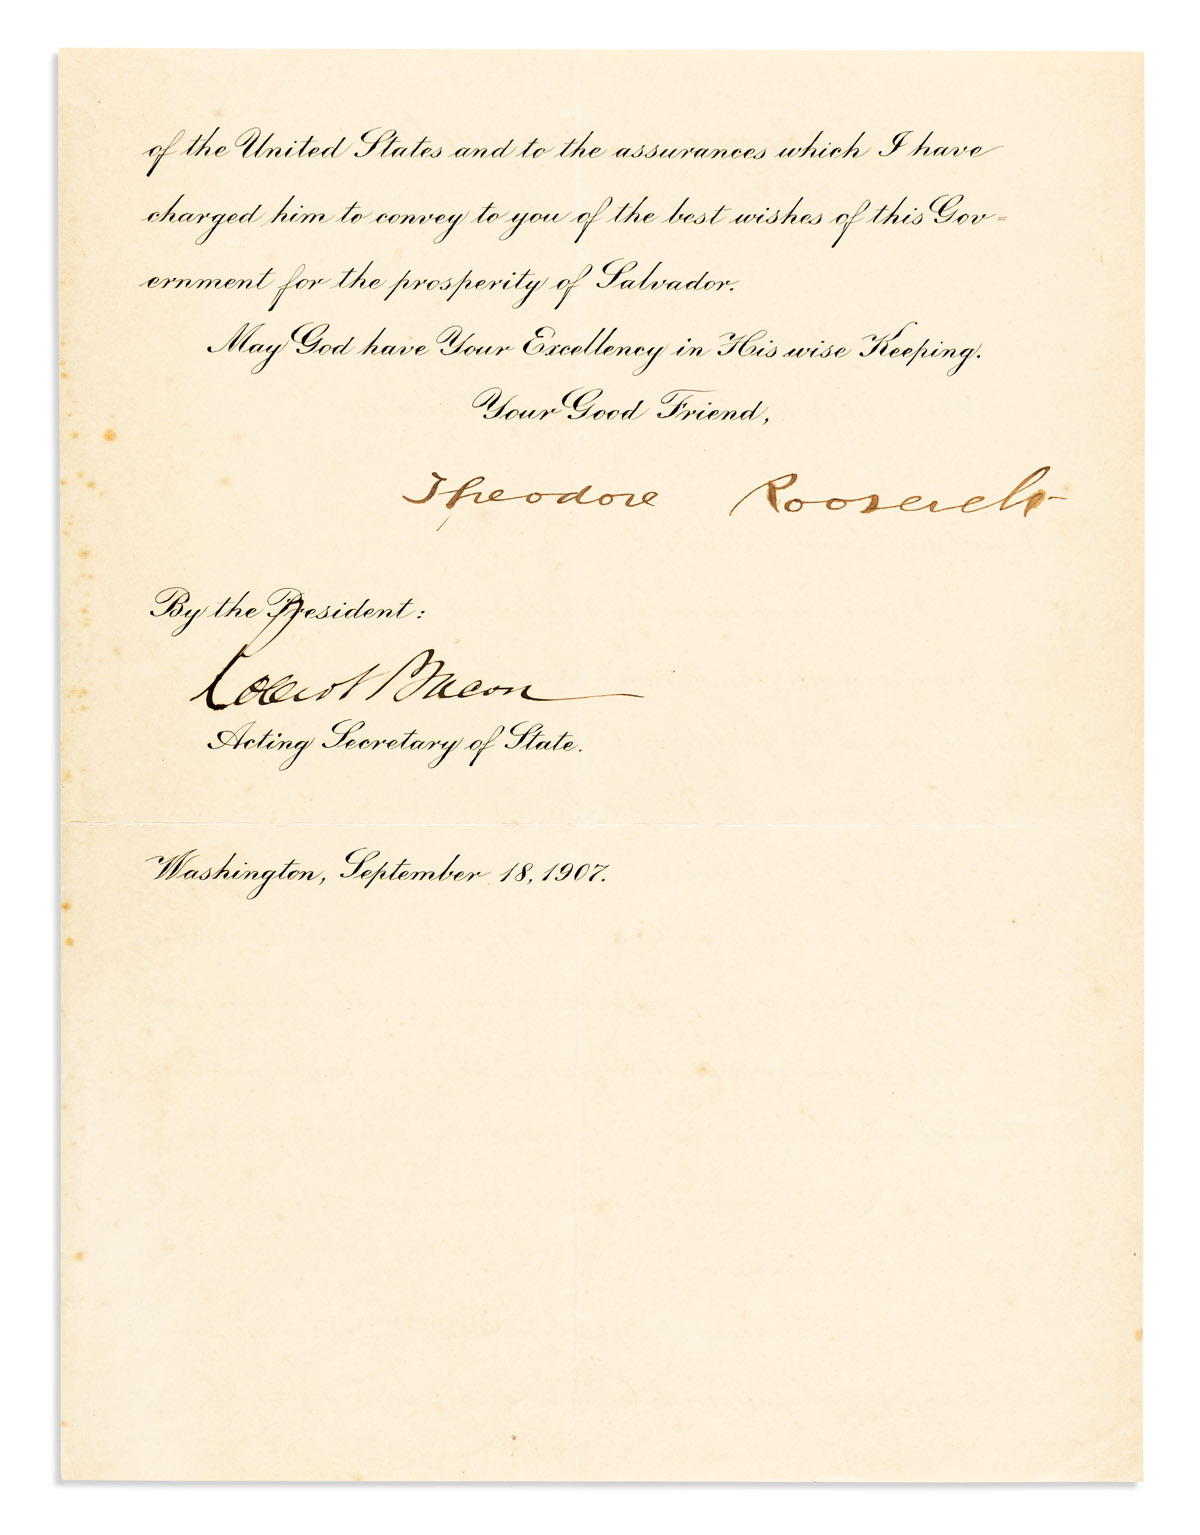 ROOSEVELT, THEODORE. Document Signed, as President, appointing Henry Percival Dodge Envoy Extraordinary and Minister Plenipotentiary to